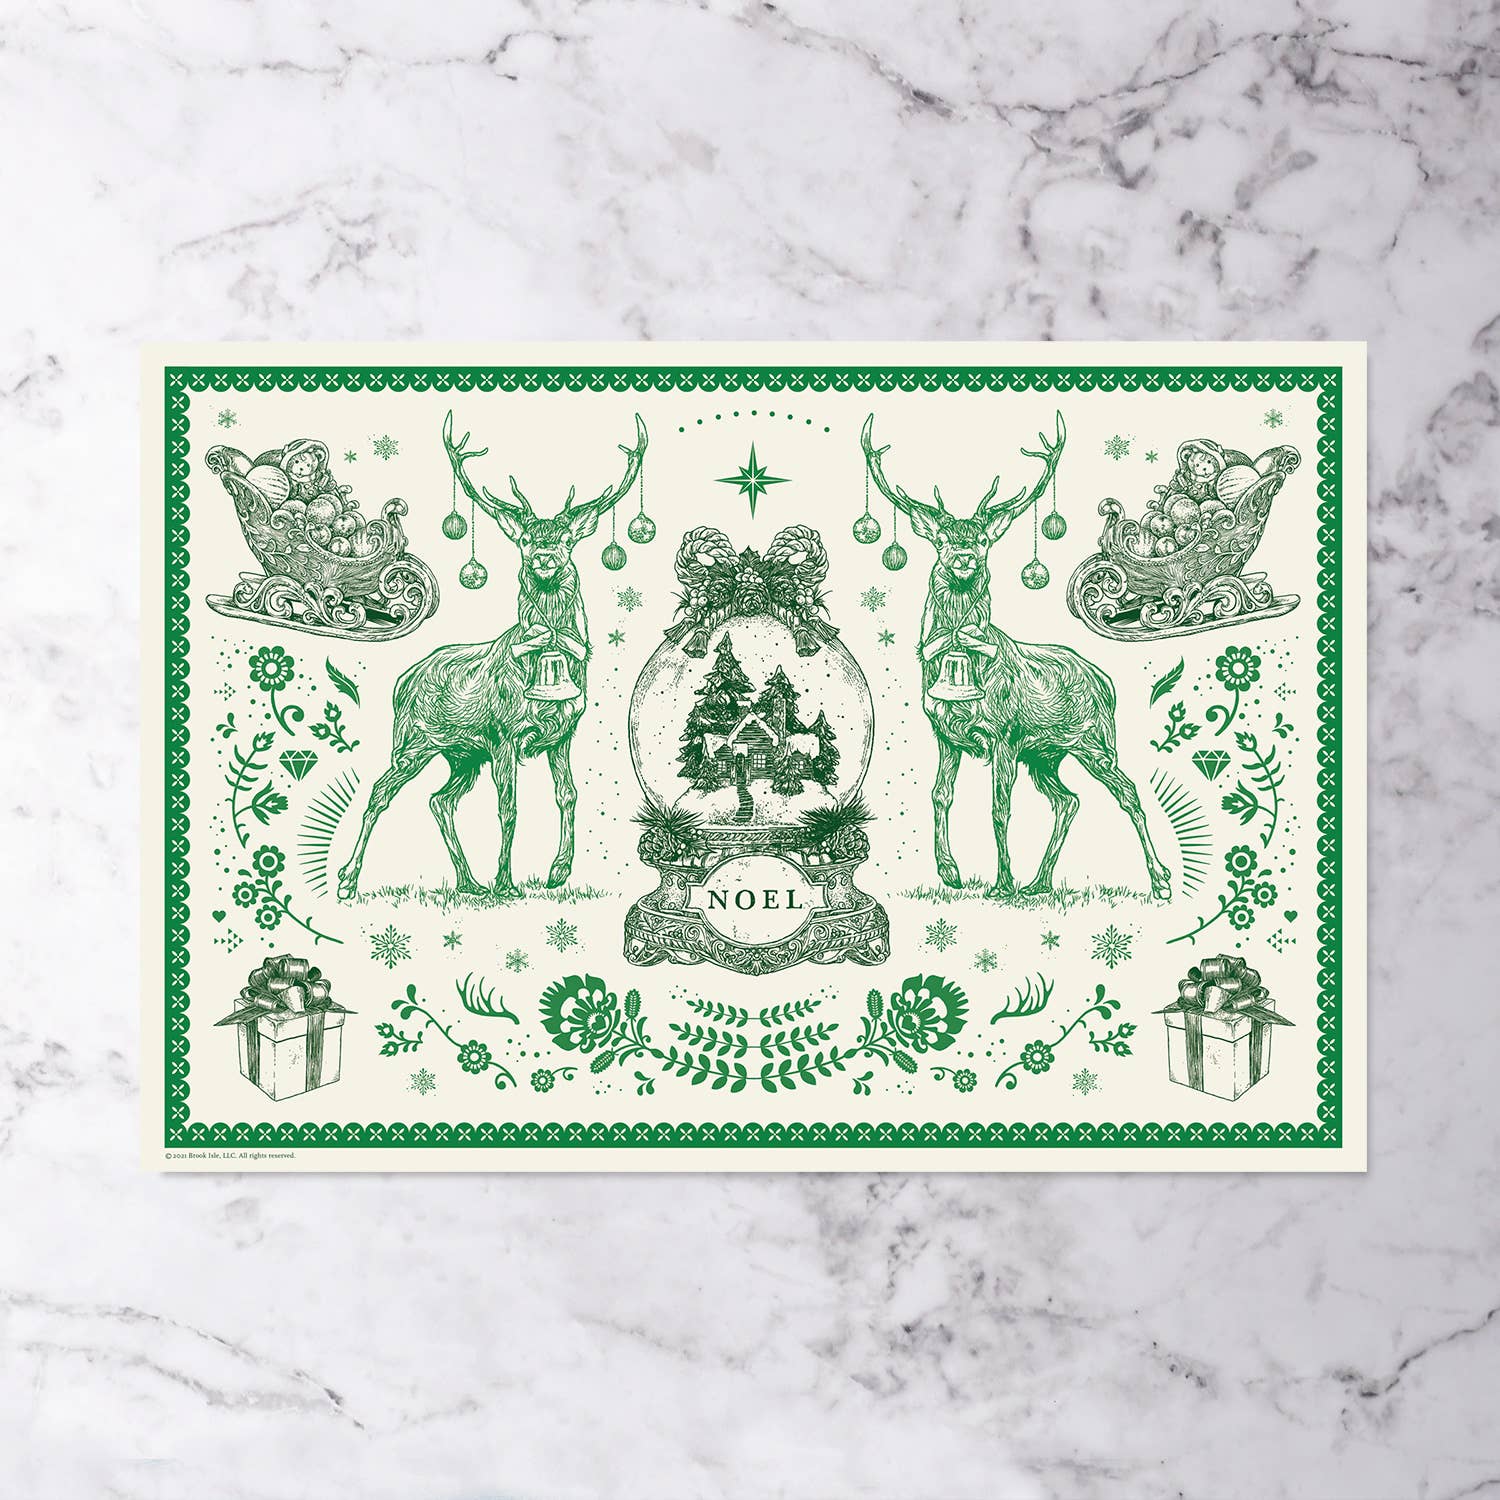 Paper Placemats (Set of 12) - Fenwick & OliverPaper Placemats (Set of 12)PaperBrook IsleFenwick & OliverMAT-Fern-5